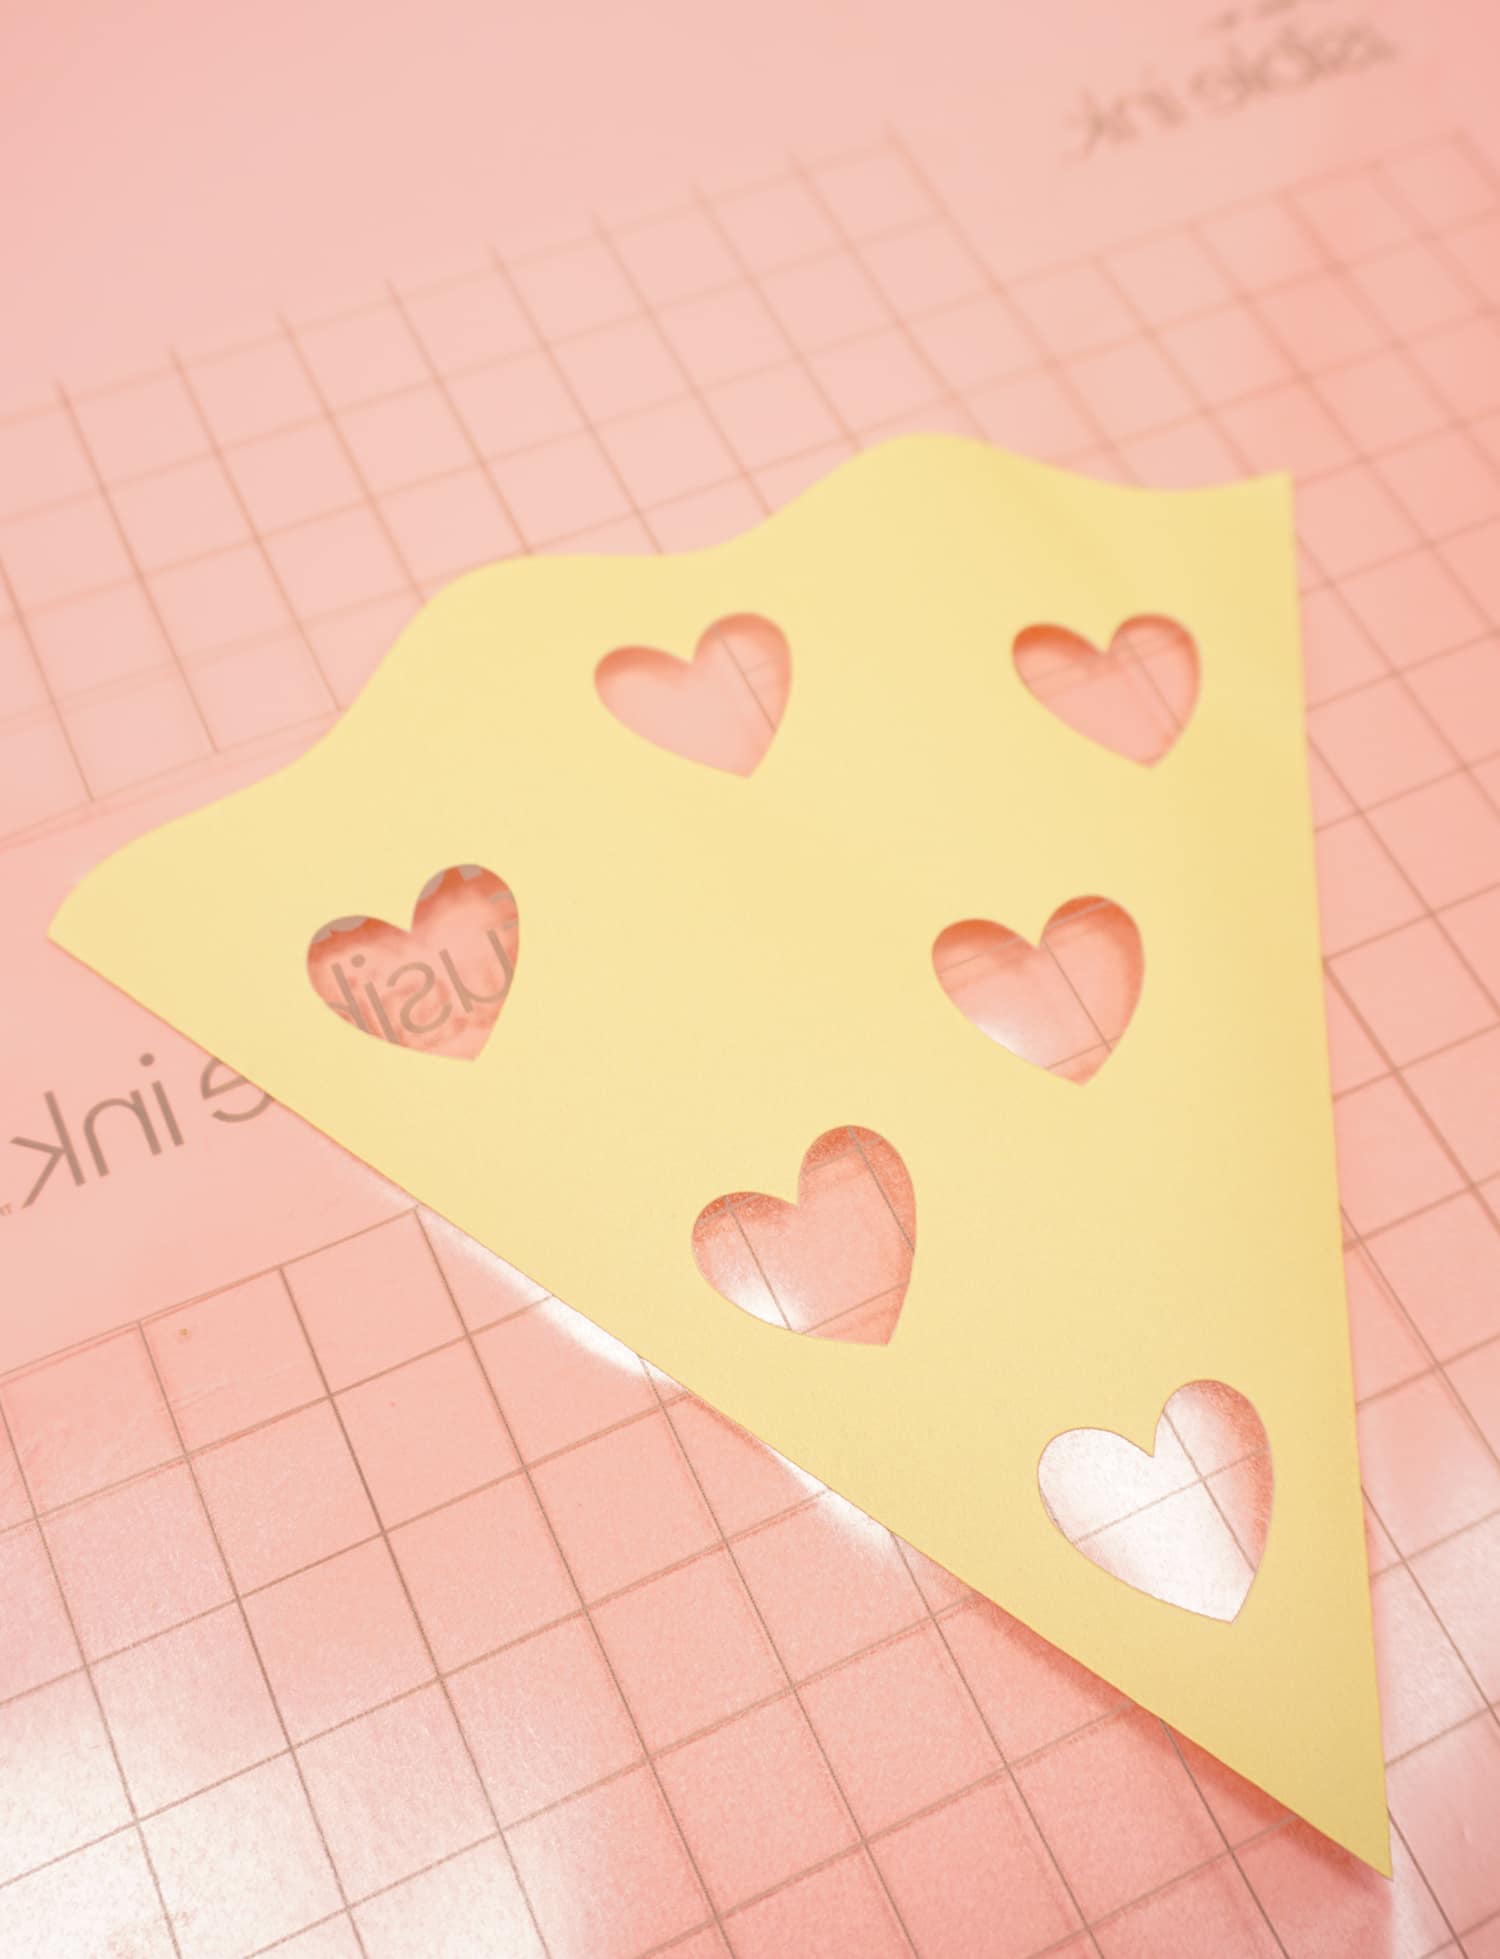 cut pizza file with hearts cut out of it 